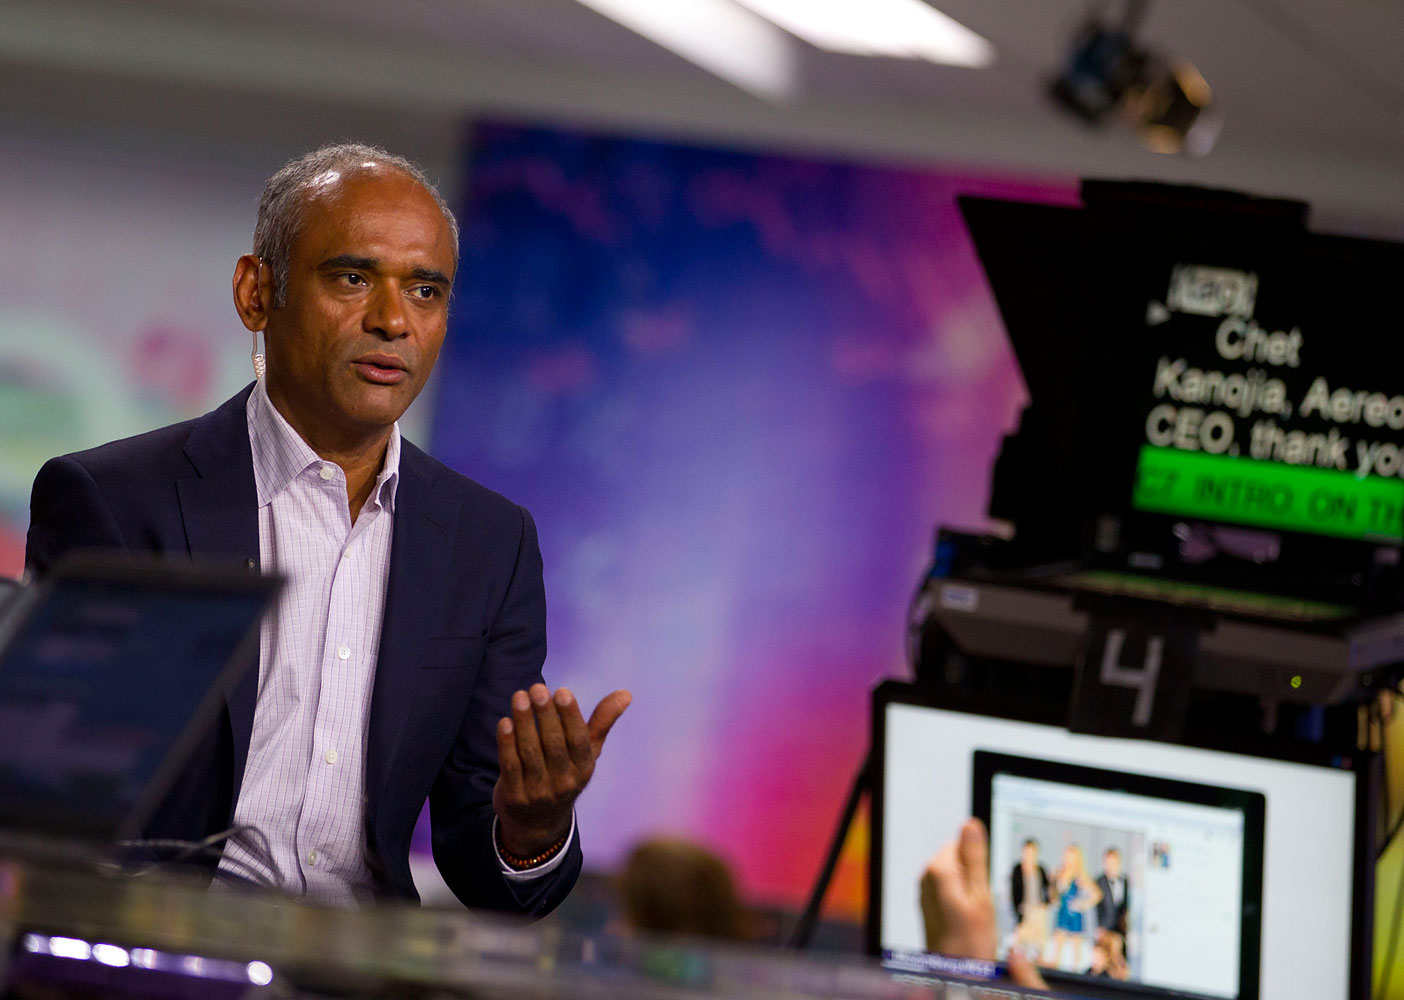 Chet Kanojia, chief executive officer and founder of Aereo Inc., speaks during a Bloomberg Television interview in New York, July 31, 2013. (Jin Lee—Bloomberg/Getty Images)